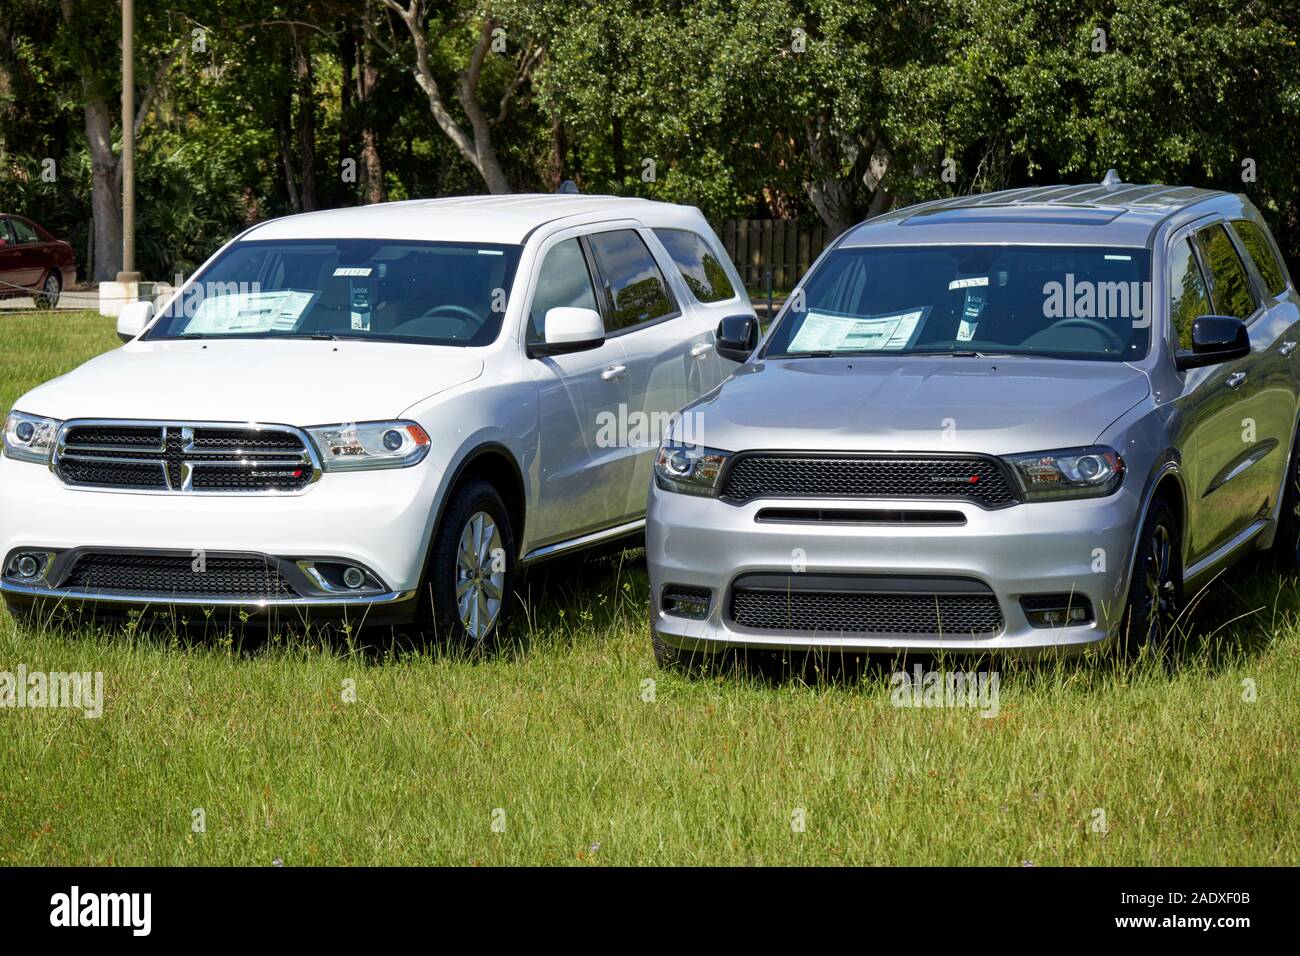 new dodge durango suv vehicles for sale parked on grass at a car dealers in florida usa Stock Photo